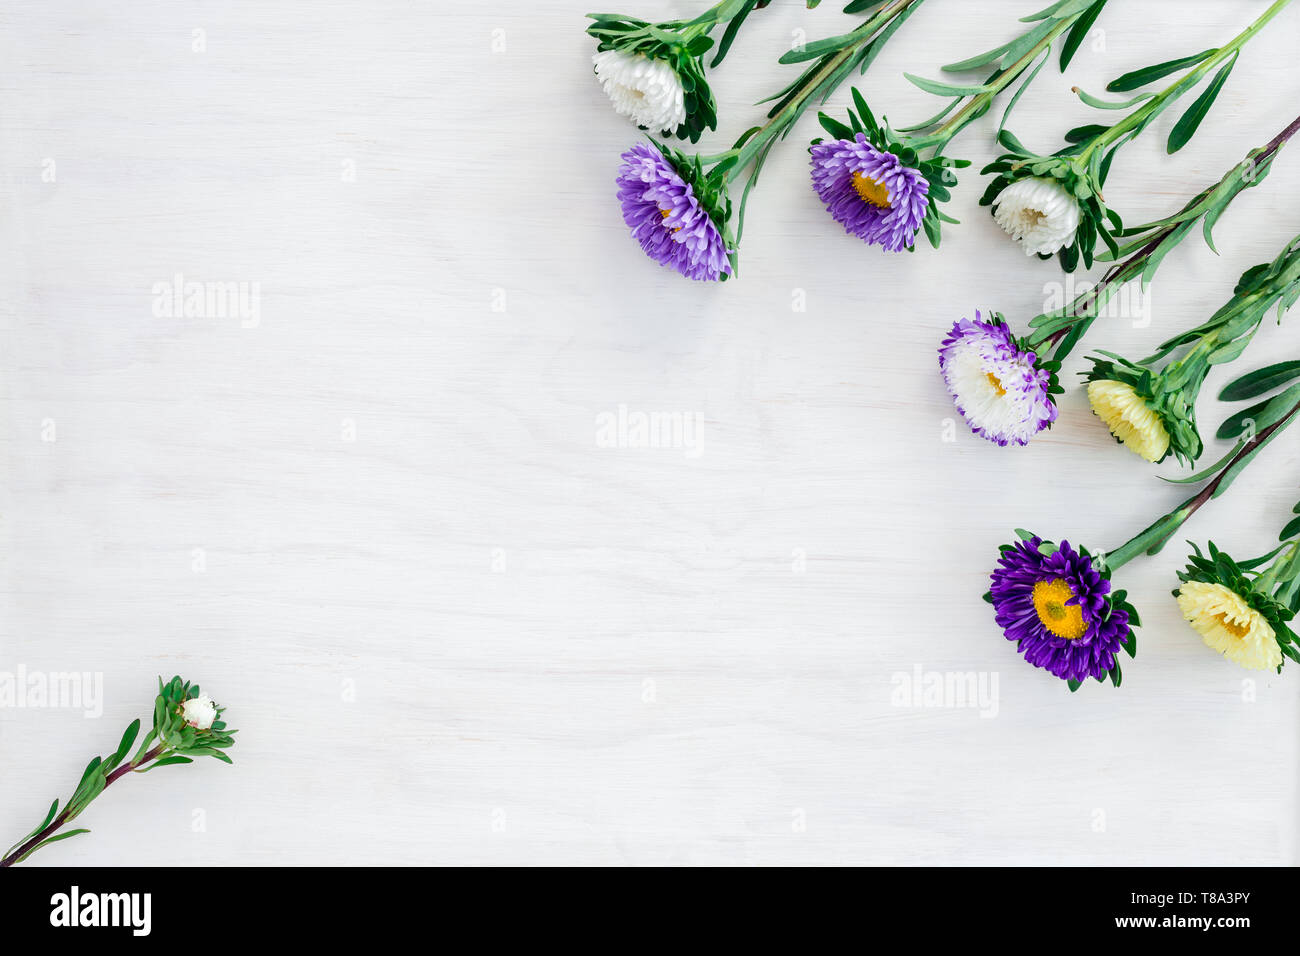 White and purple asters, on painted white wooden background with copy space. Stock Photo